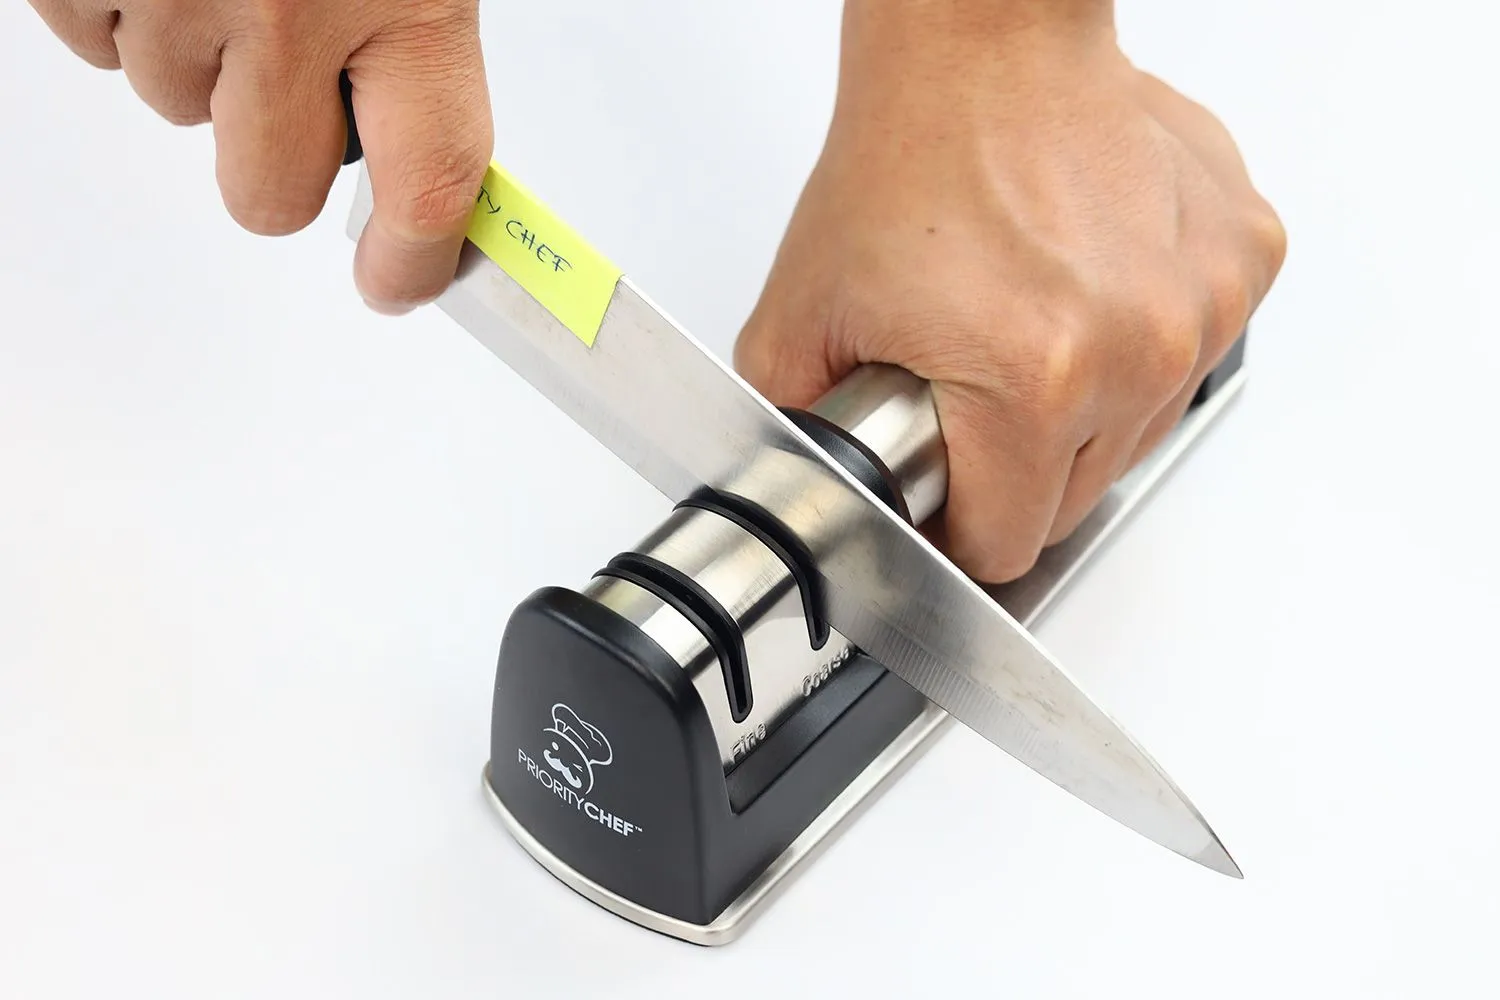 https://cdn.healthykitchen101.com/reviews/images/knife-sharpeners/cl5rmcmov0010sf883lqg4wuh.jpg